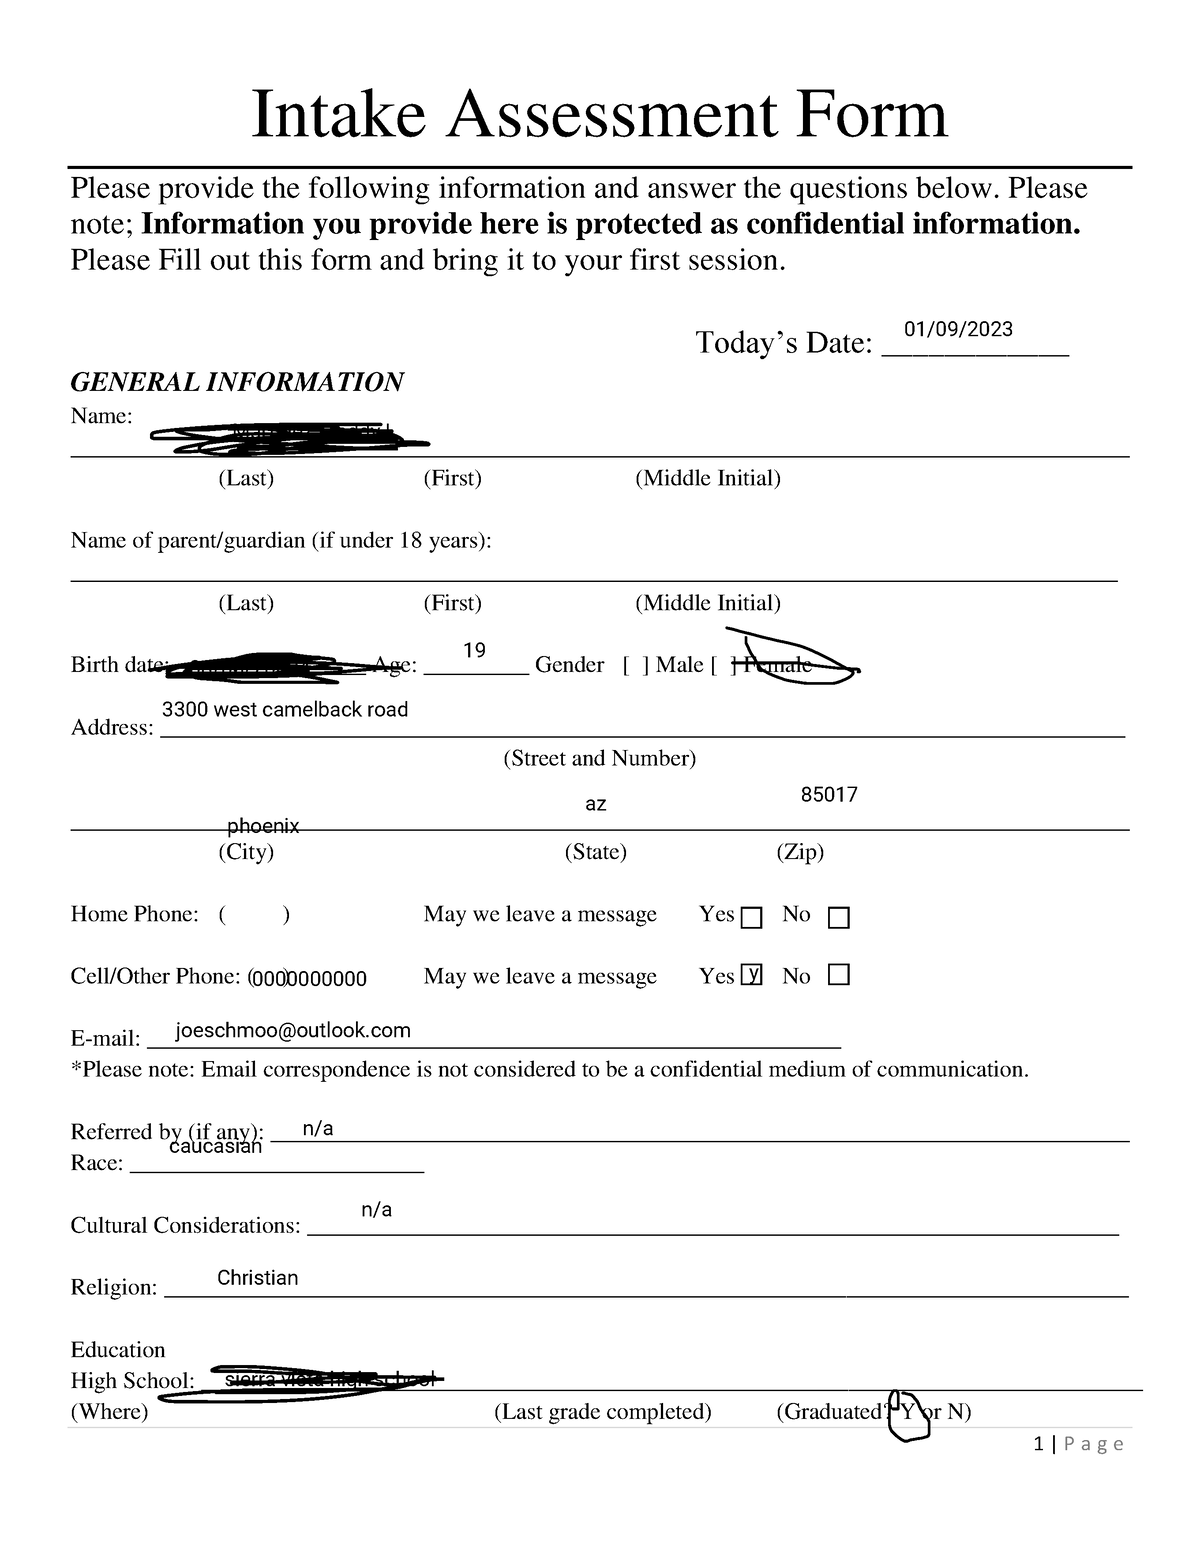 Fictional In-Take Form - Intake Assessment Form Please provide the ...